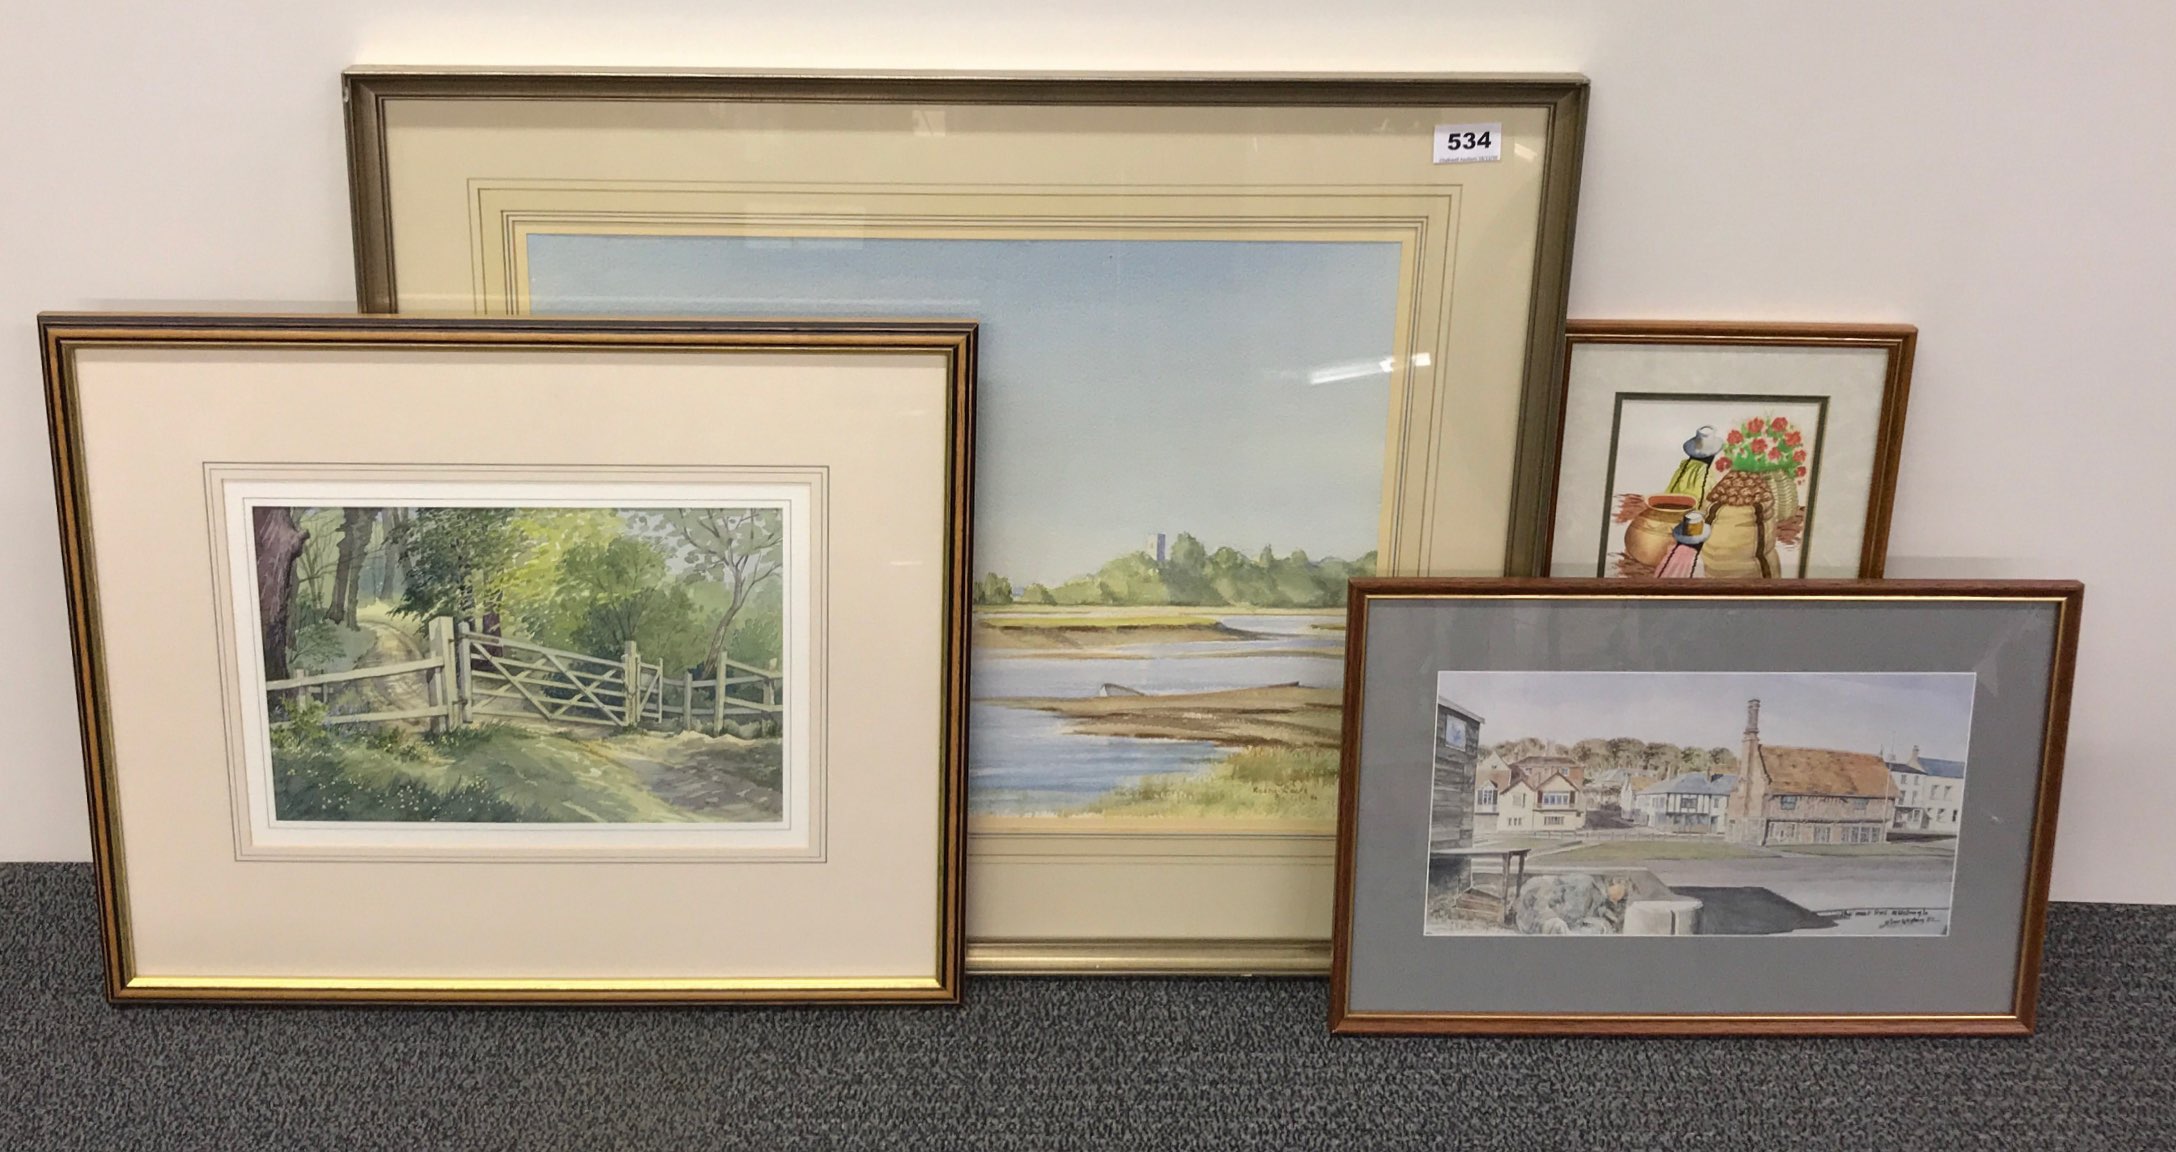 A framed watercolour by Roger Corfe (1912-2004), frame size 70 x 56cm. Together with a framed